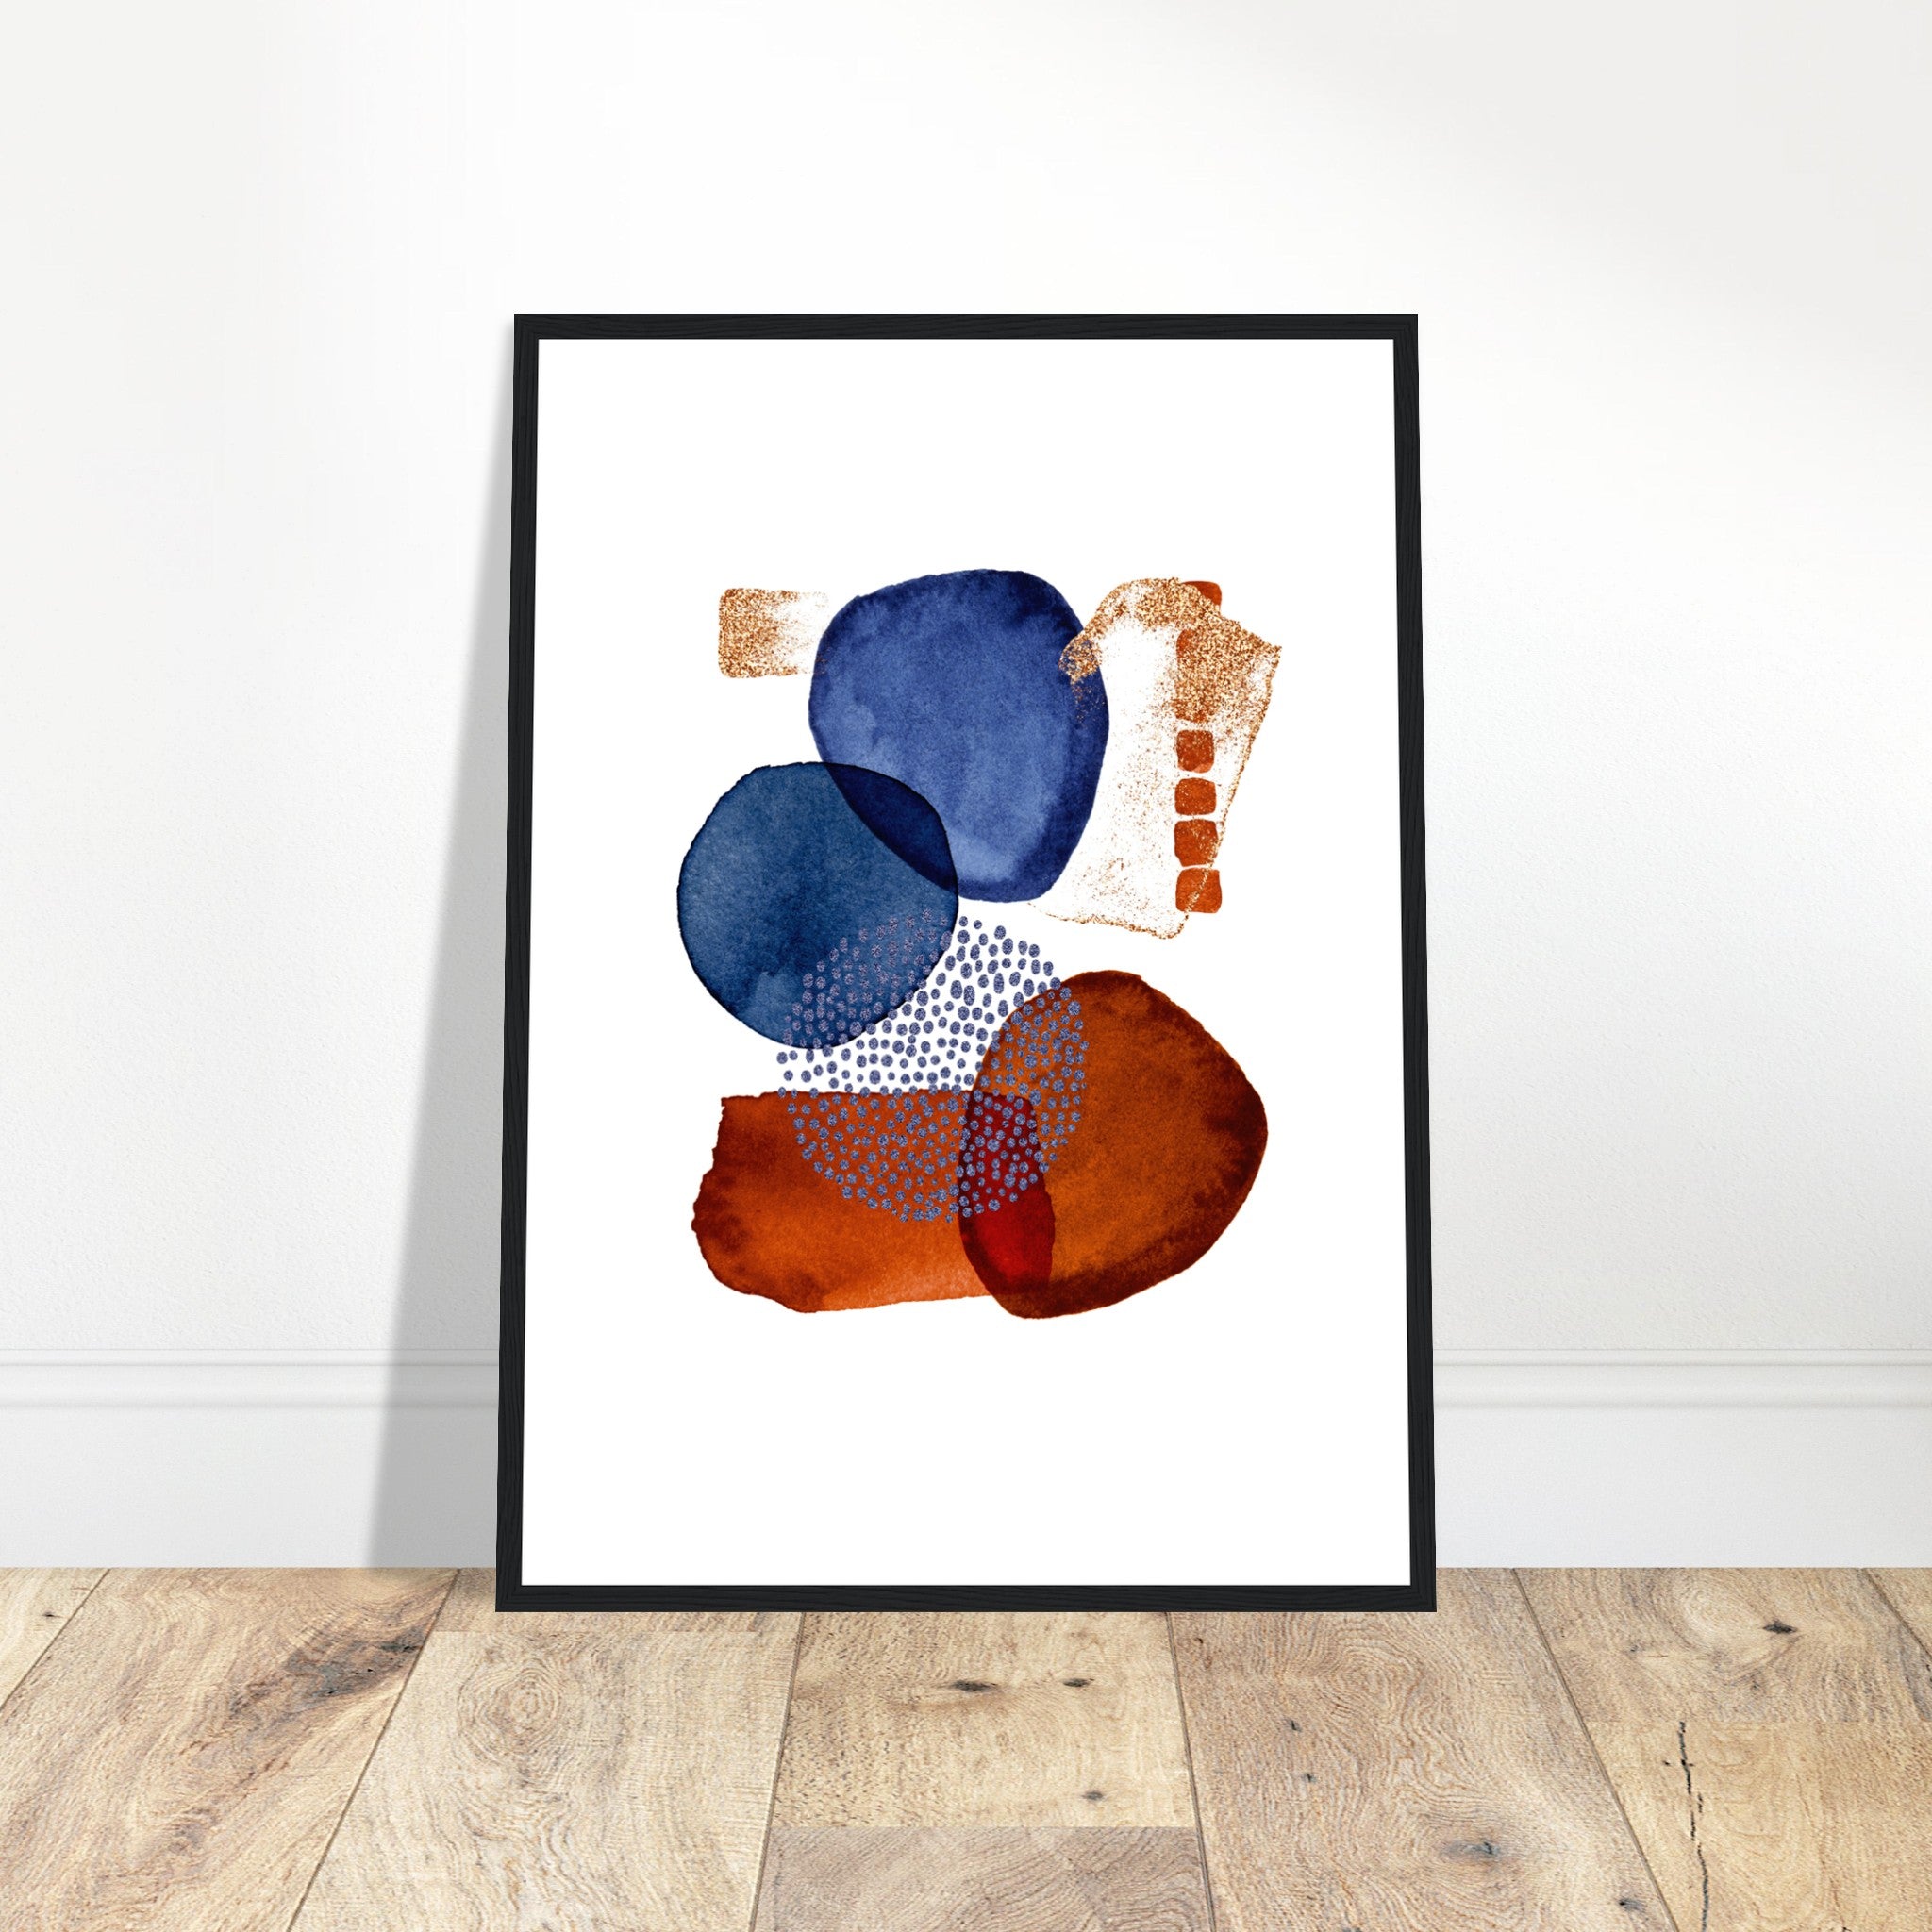 Abstract Watercolor Shapes 2 Poster